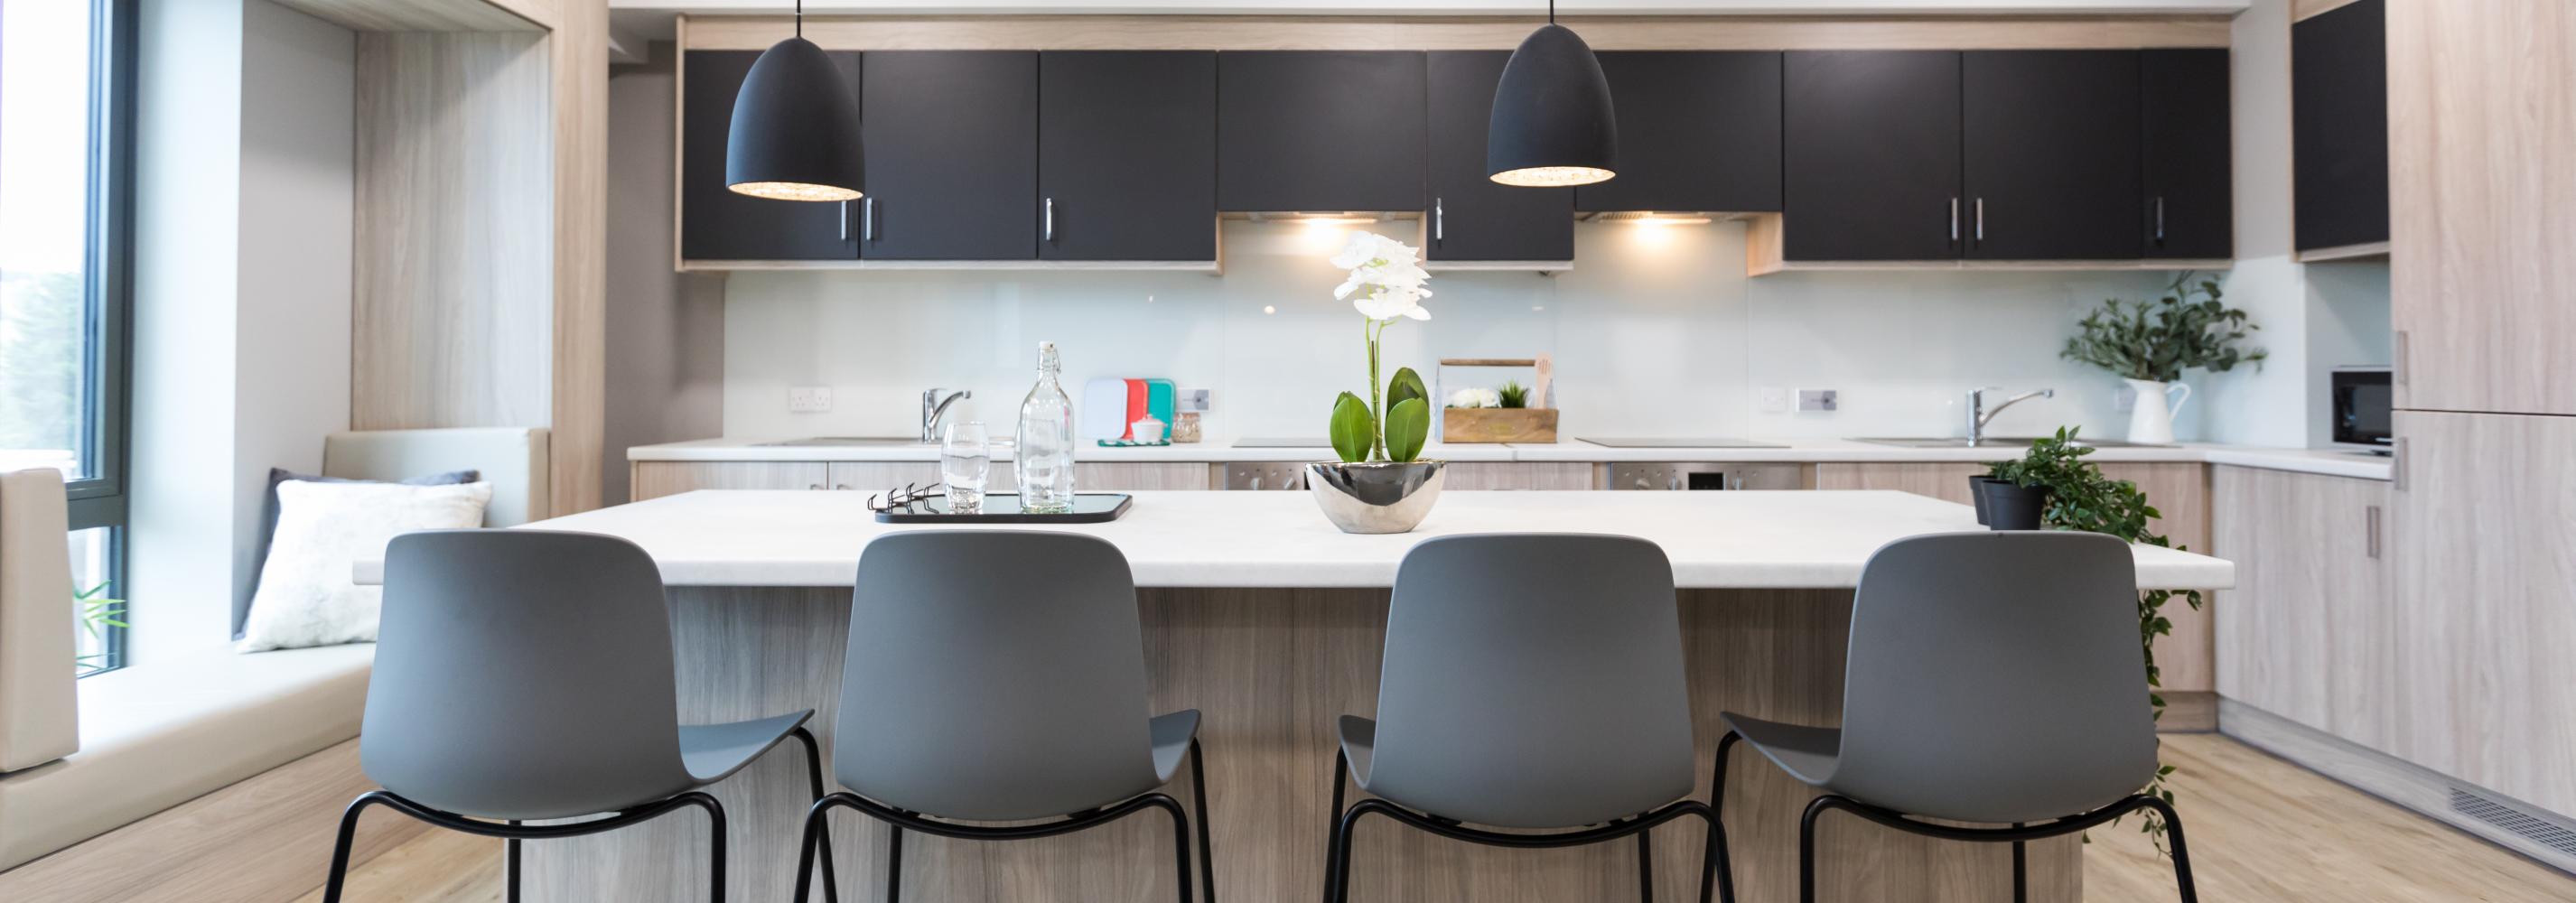 Shared Kitchen breakfast bar with stools